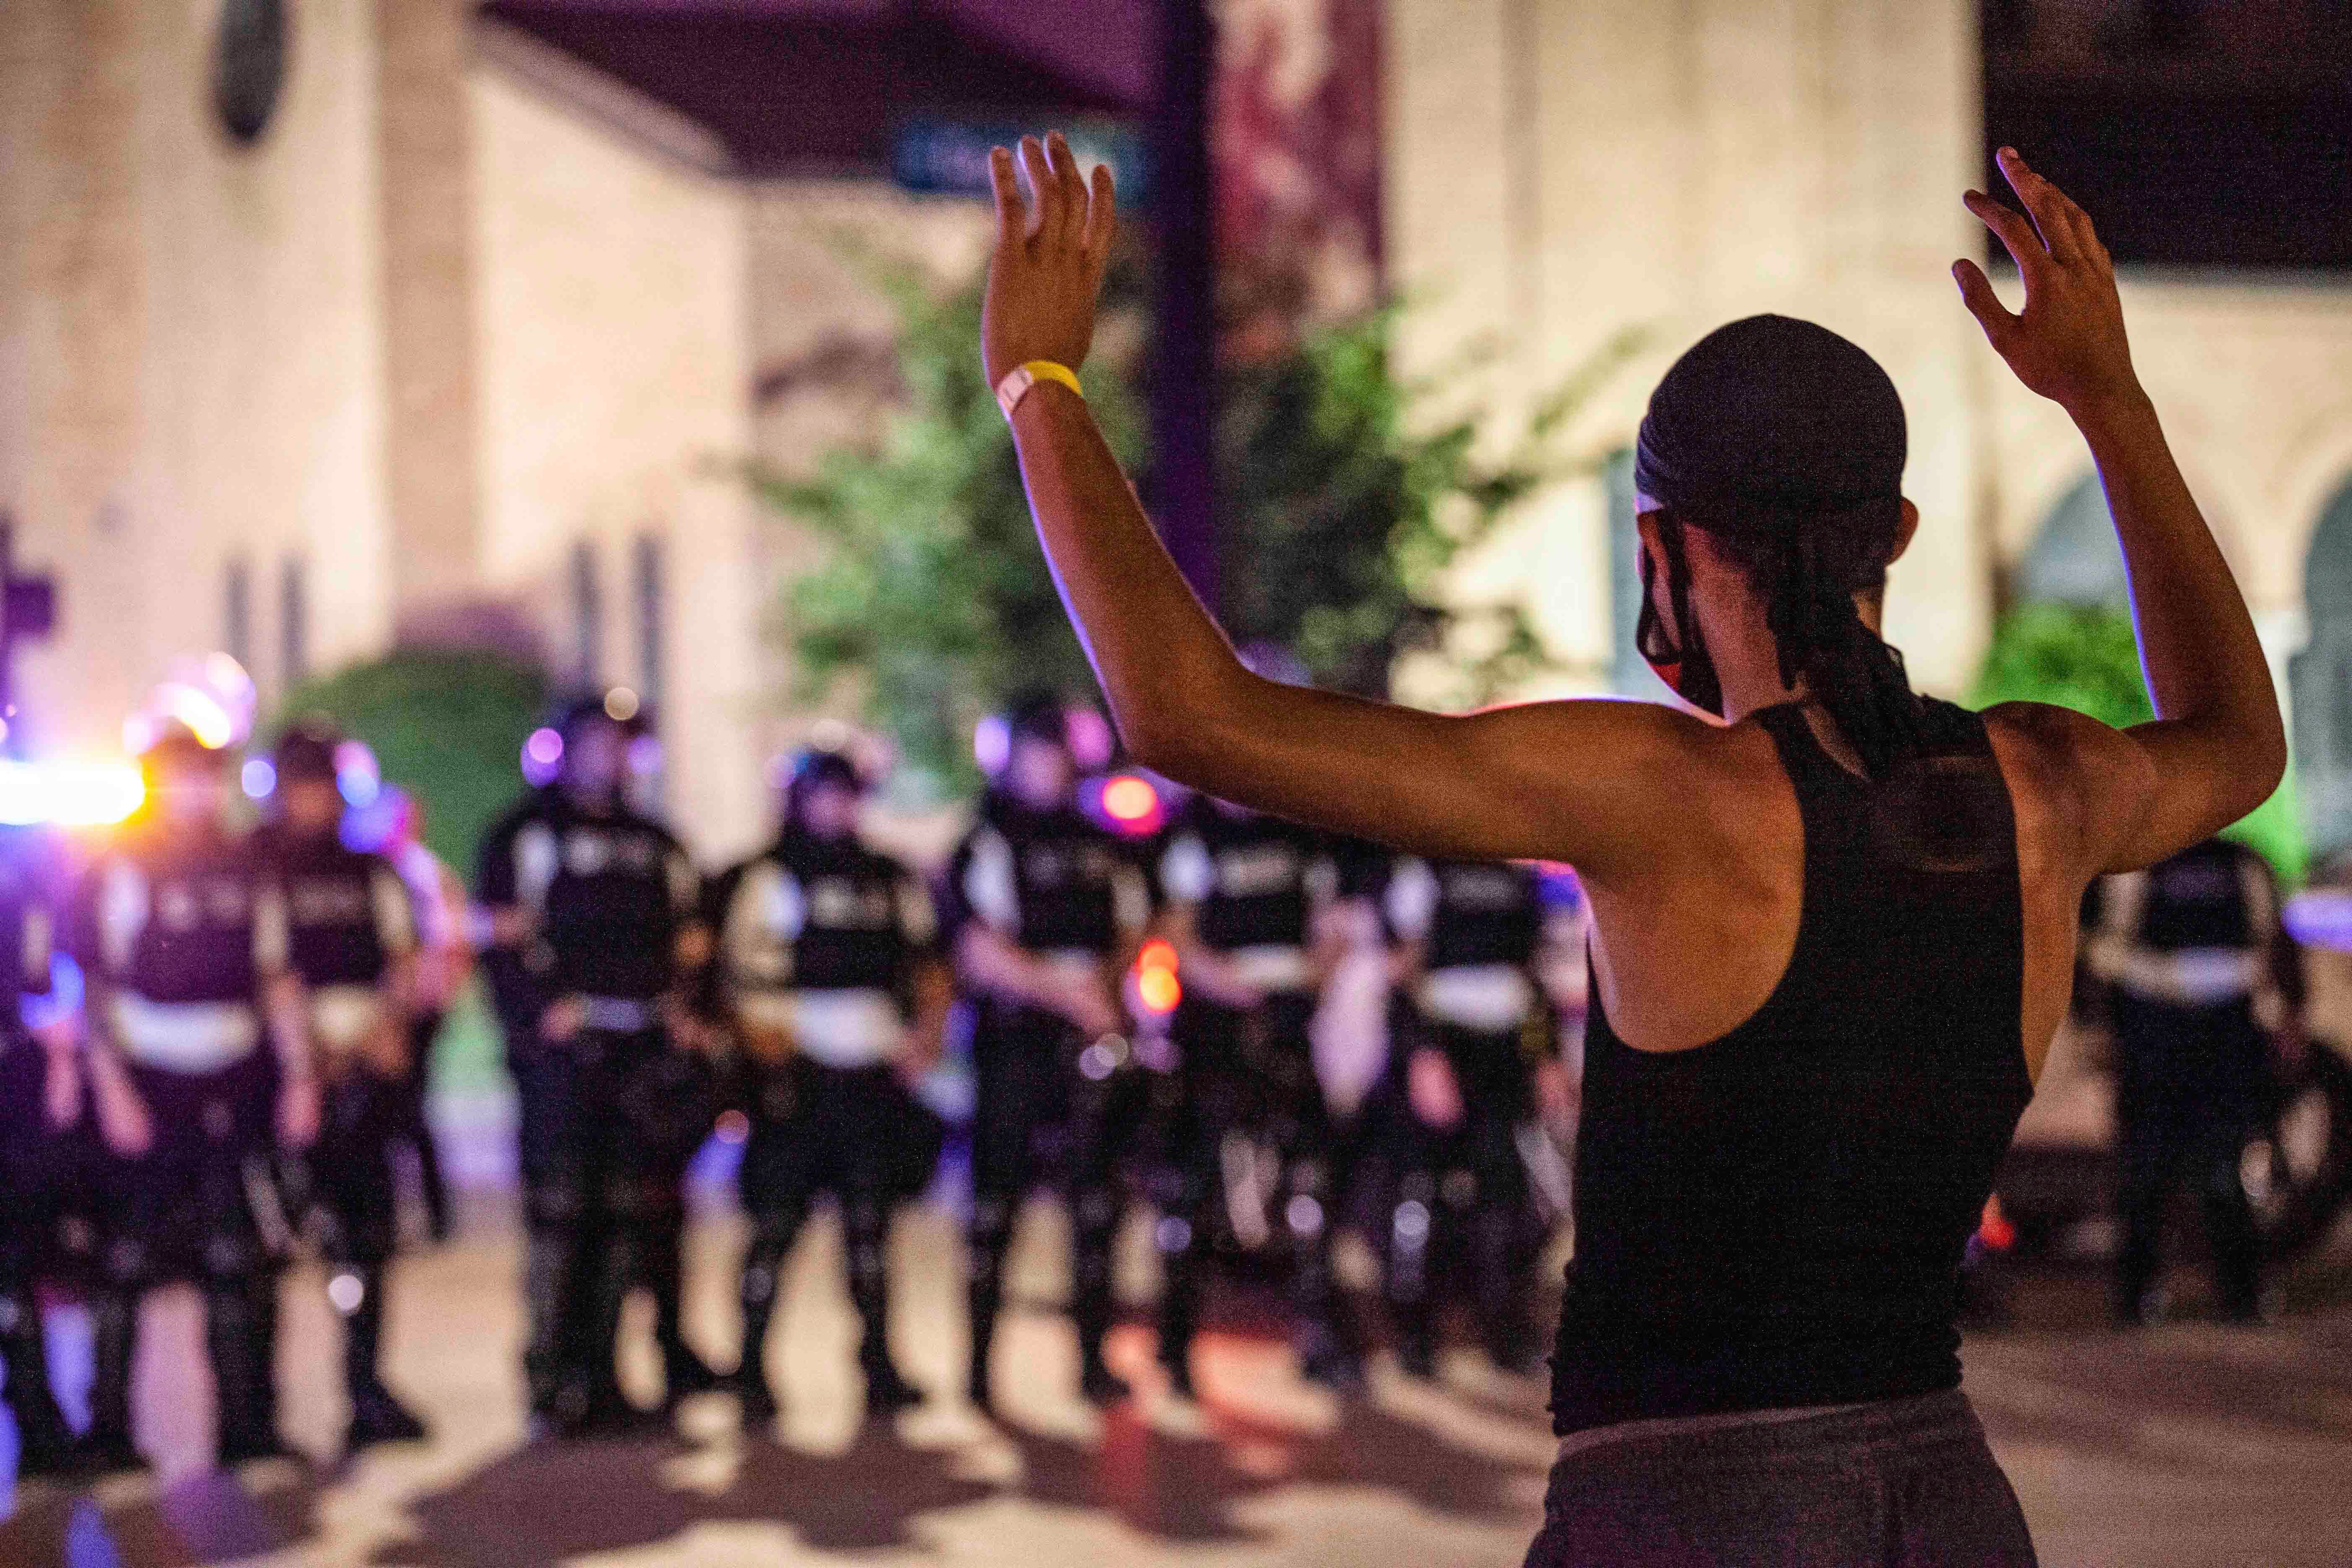 A protester puts his hands up in front of a line of police in riot gear in the US city of Columbus, Ohio, on June 5, 2020.